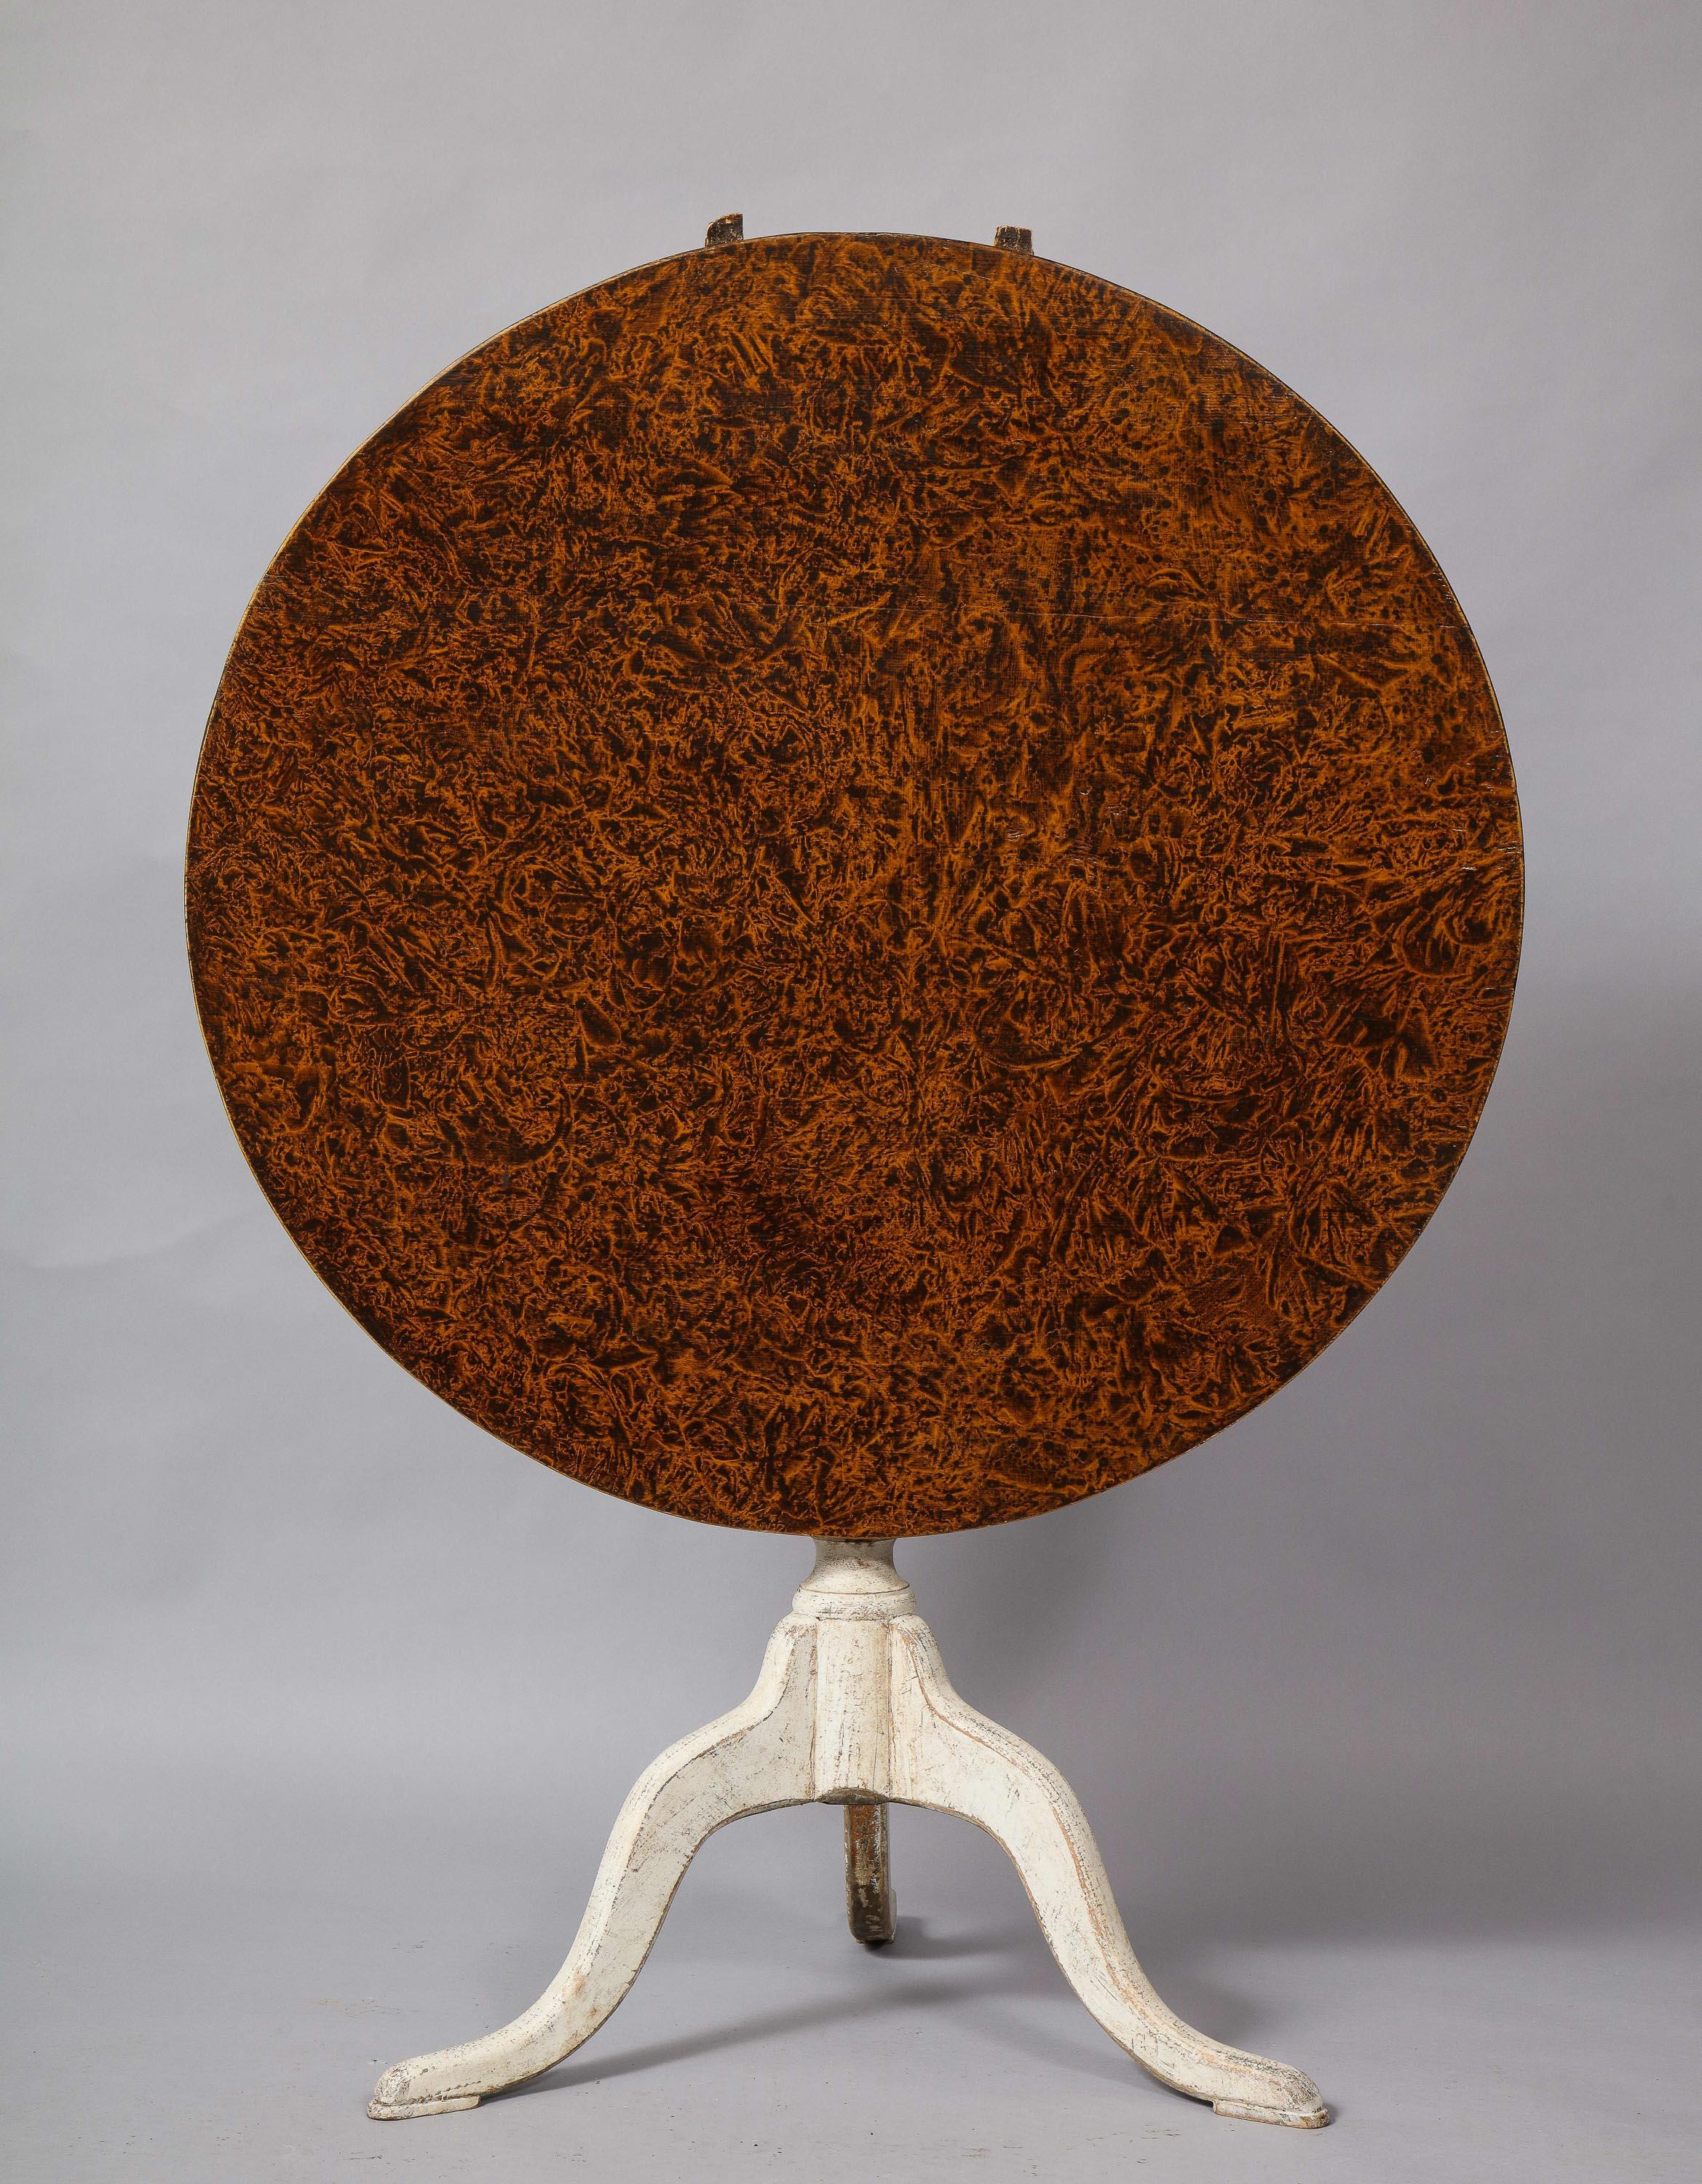 Good Swedish early 19th century tilt top tripod table with original paint decoration, the top with scumble paint resembling burr alder or burl birch grain over chalky white painted base with turned shaft and gracefully shaped legs, the whole with